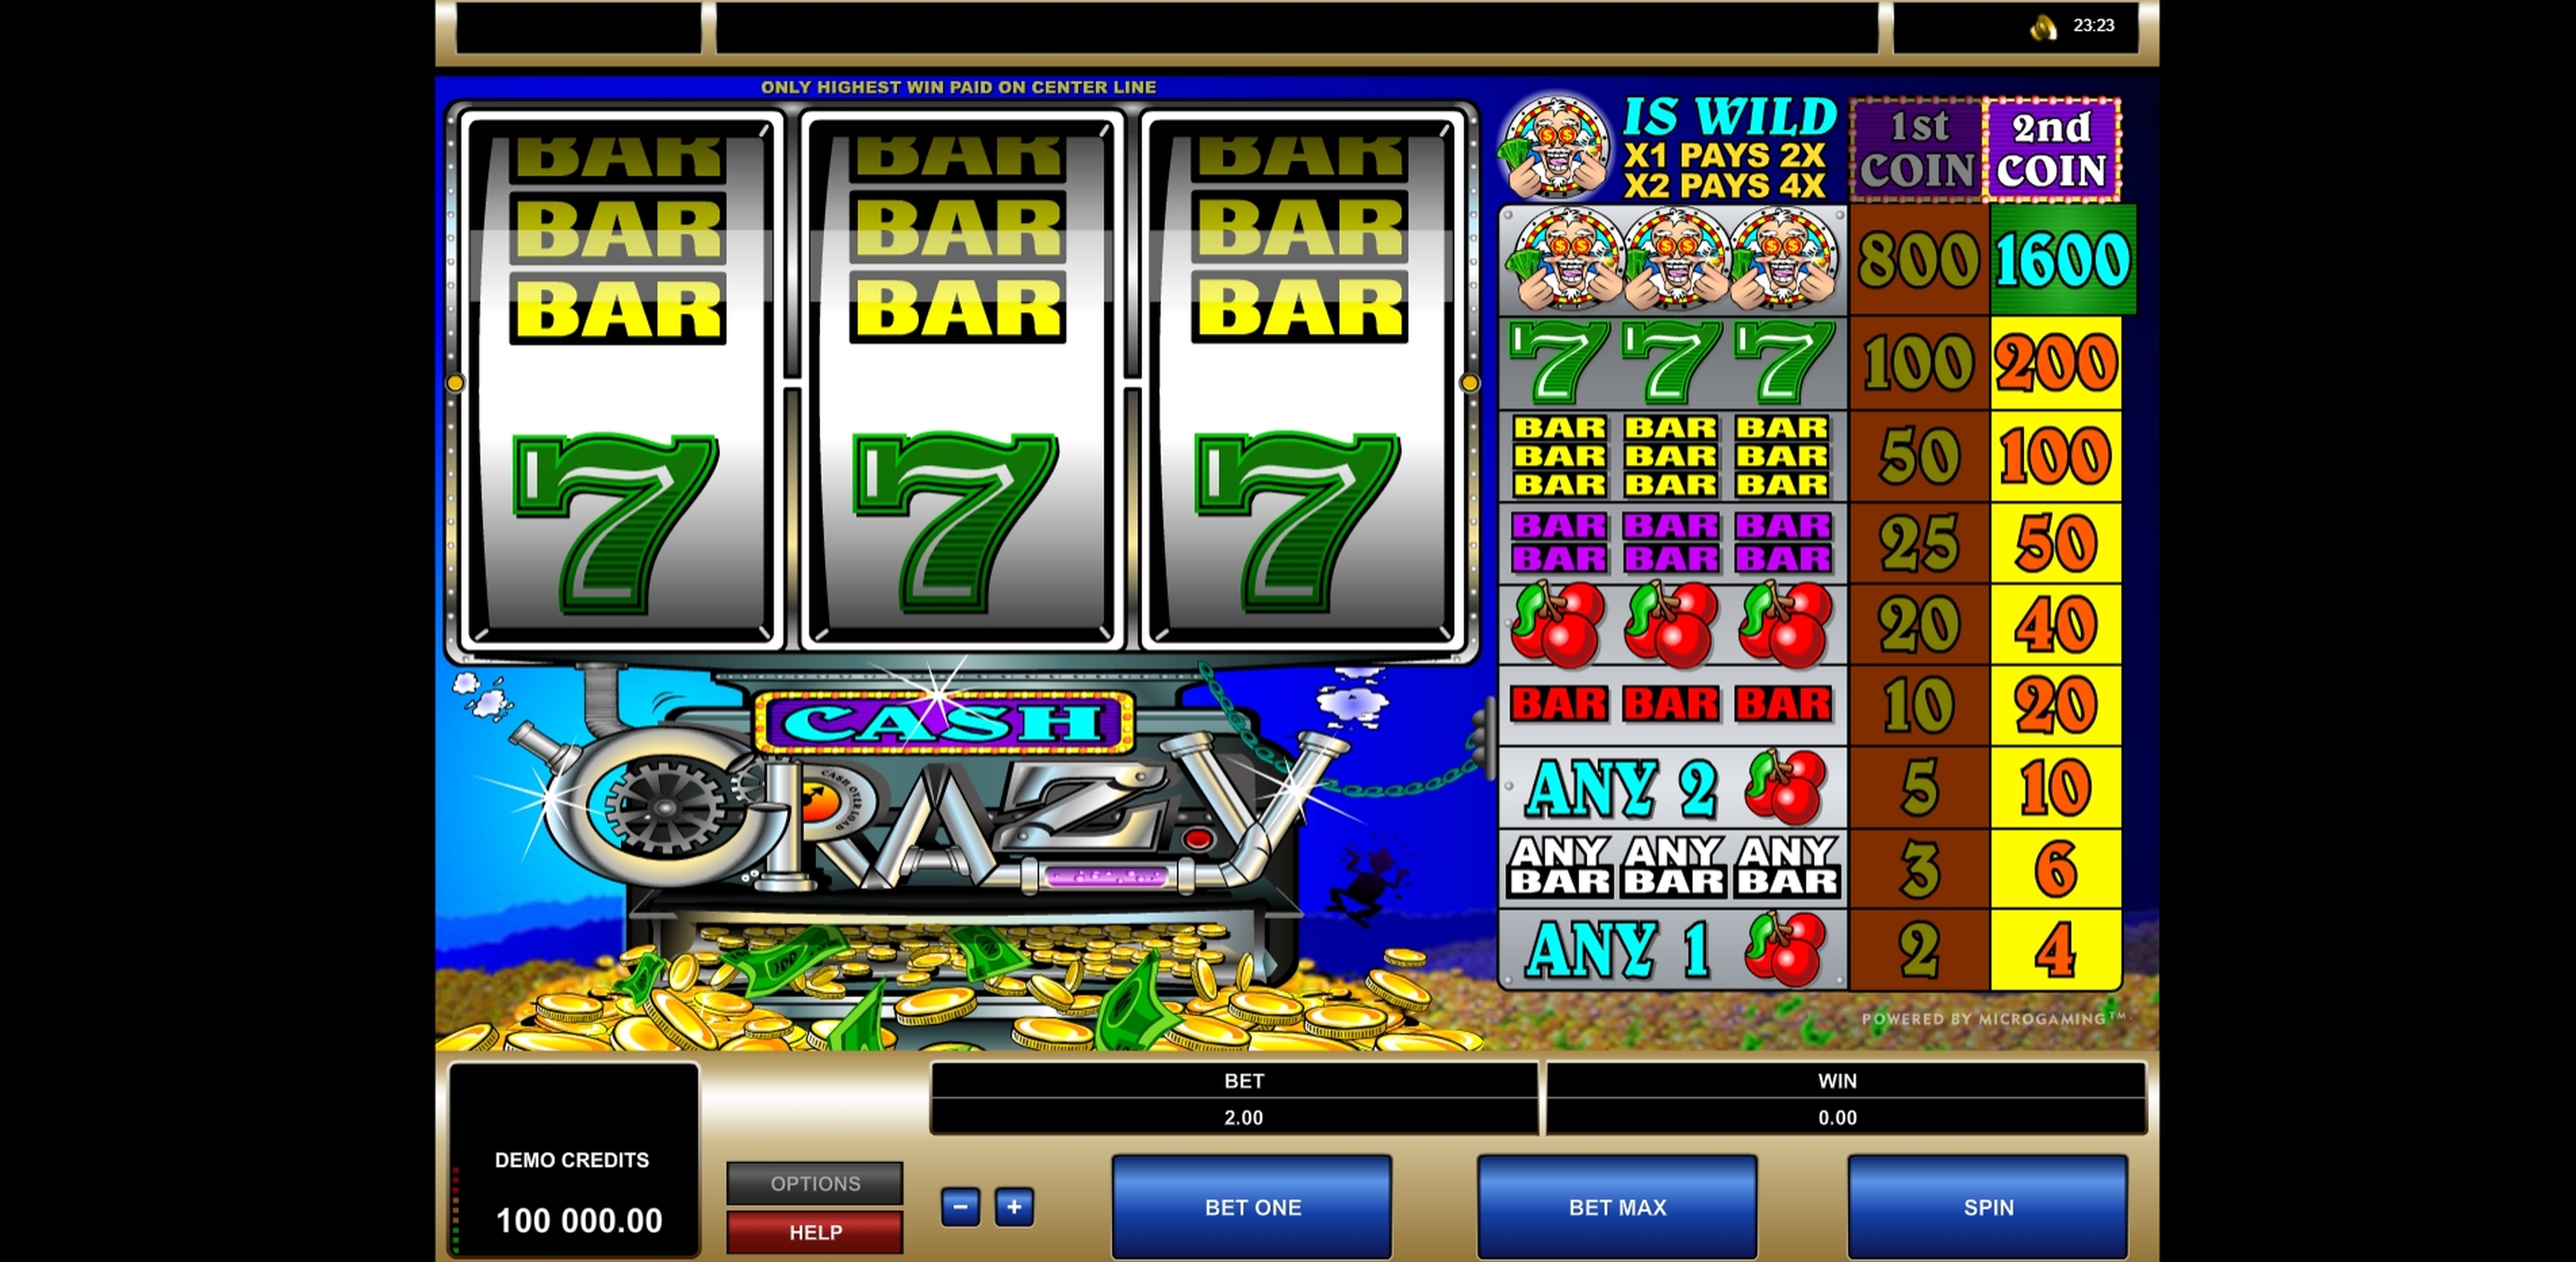 Reels in Cash Crazy Slot Game by Microgaming